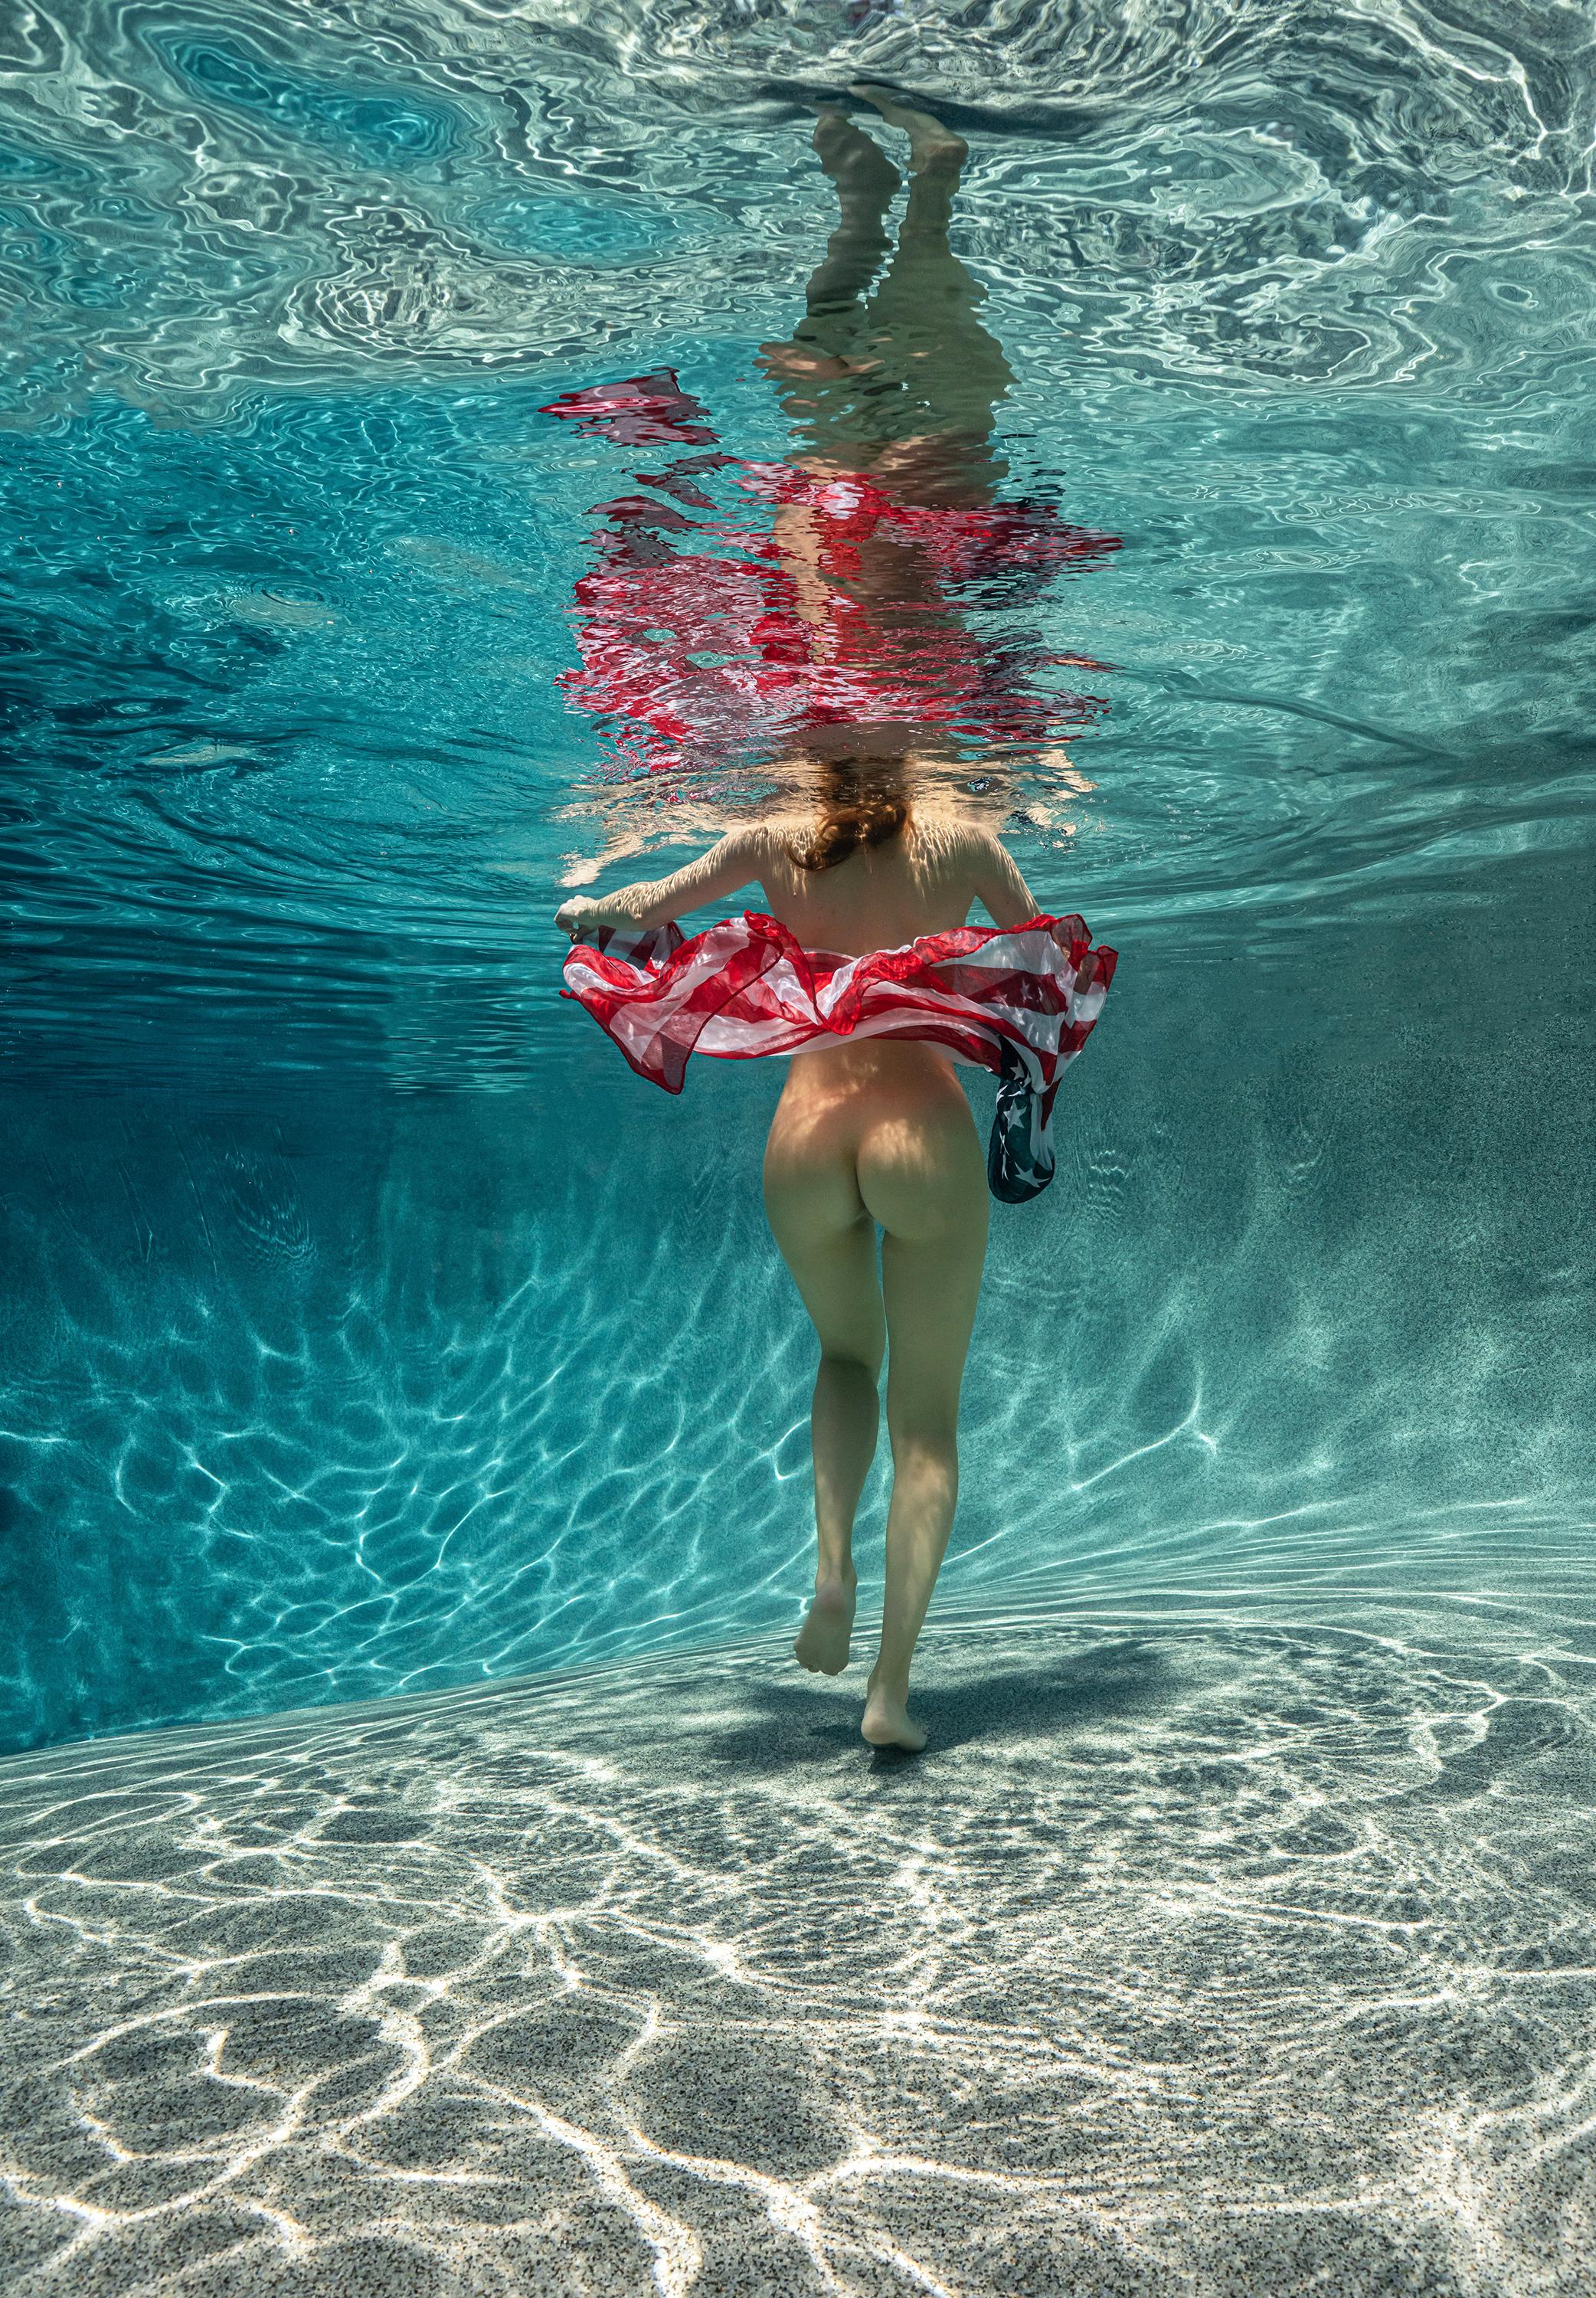 Alex Sher Figurative Photograph - Independence II - underwater nude photograph - archival pigment print 35х24